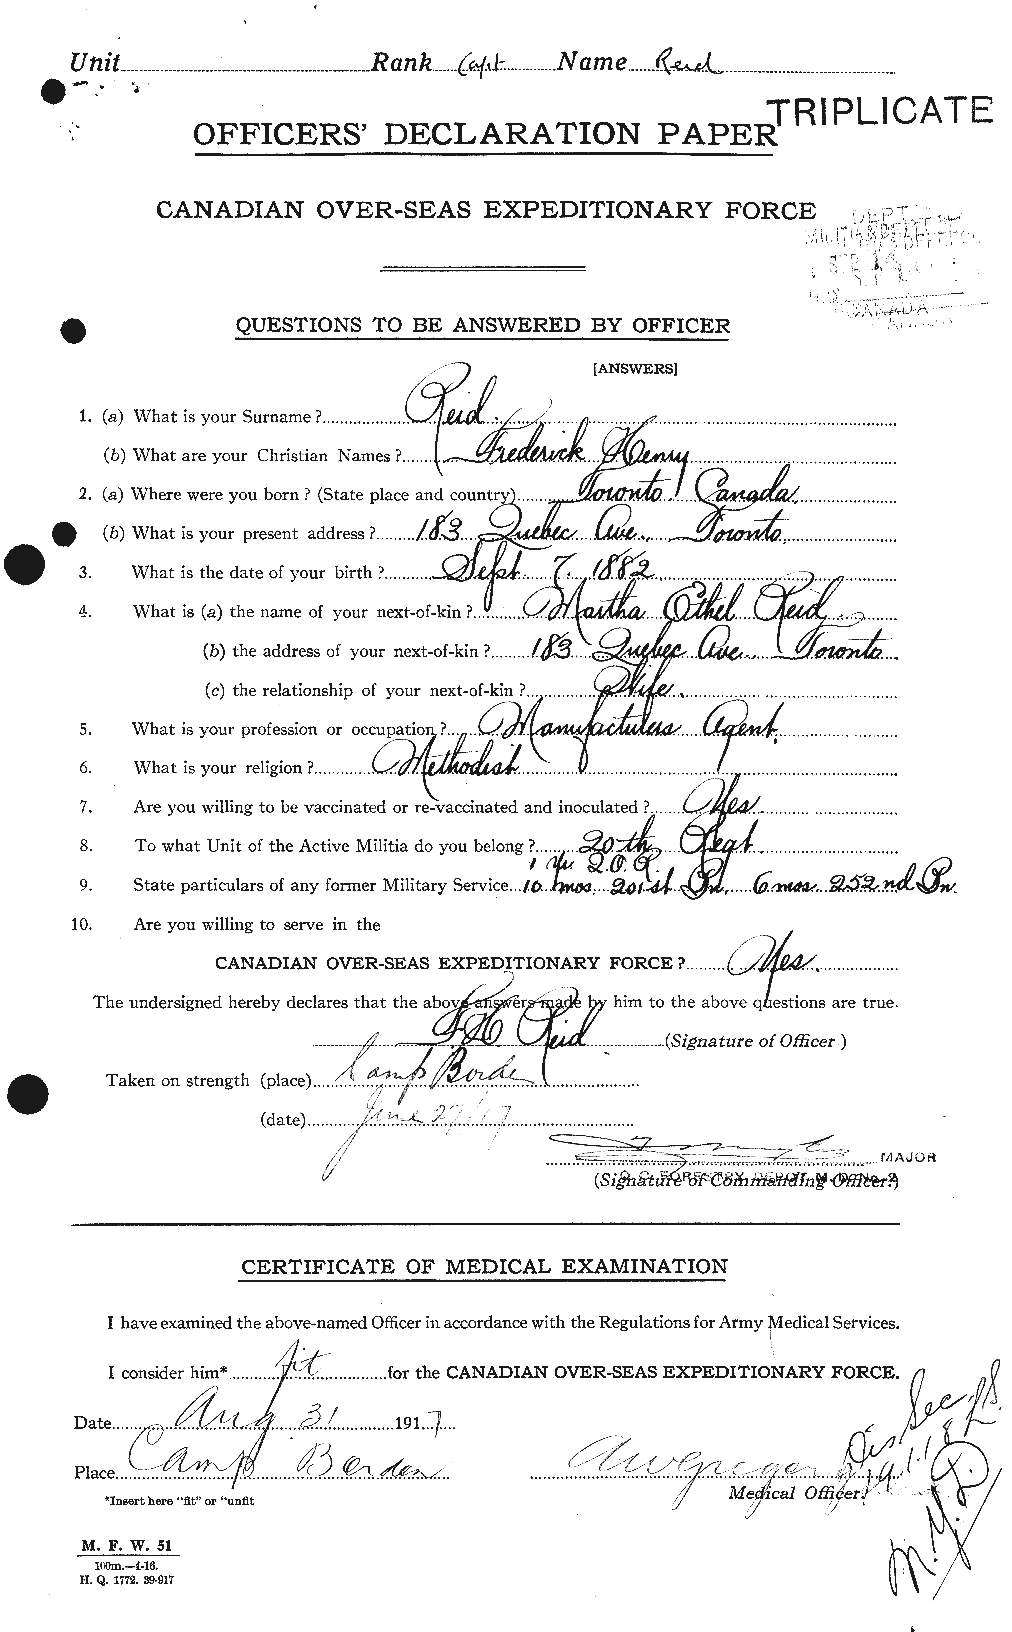 Personnel Records of the First World War - CEF 598070a